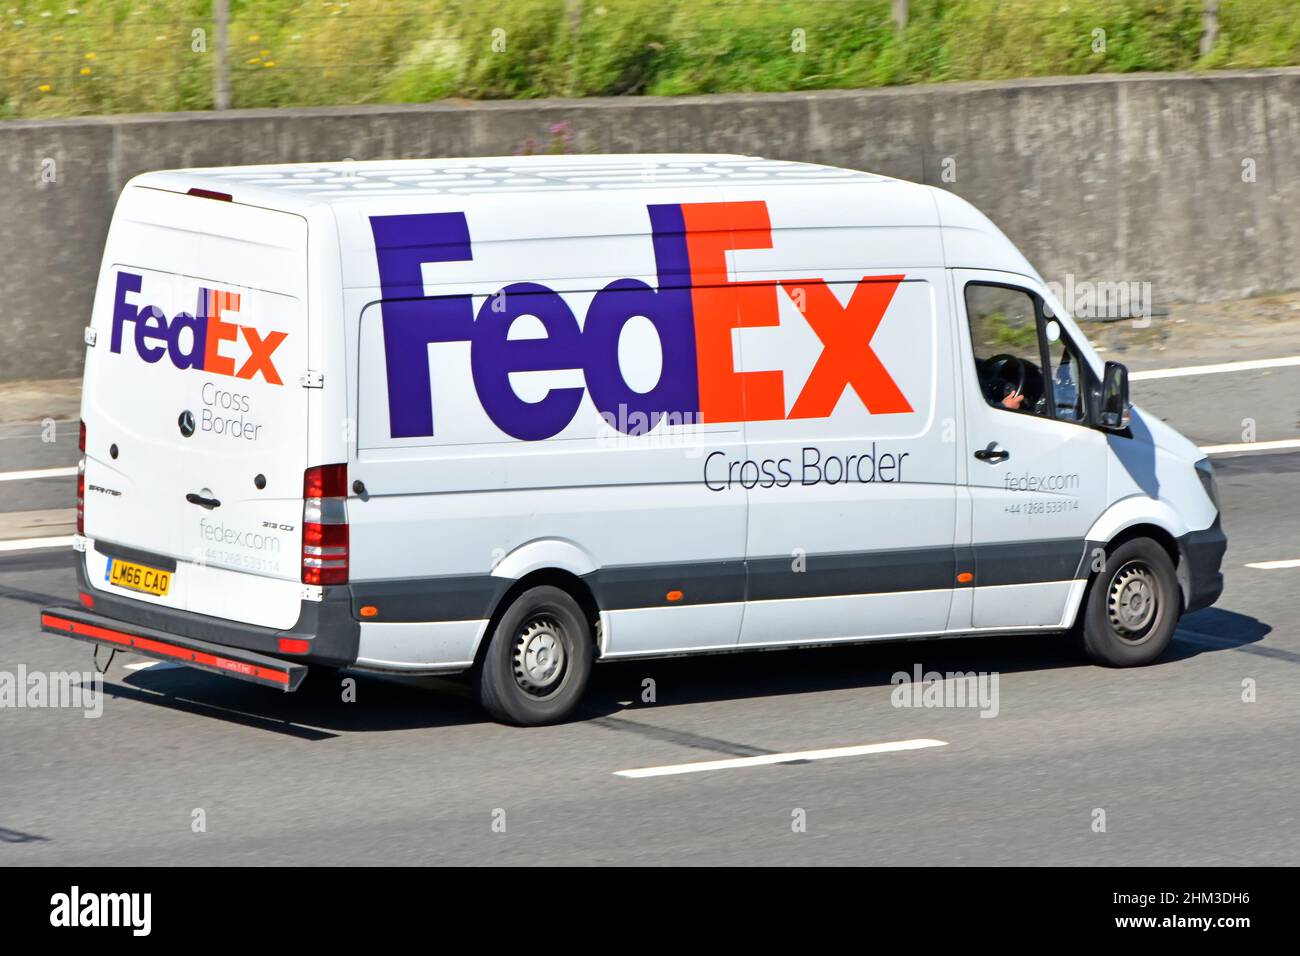 FedEx red & blue business logo brand on side back view of Cross Border parcel delivery supply chain van & driver travelling along UK motorway road Stock Photo